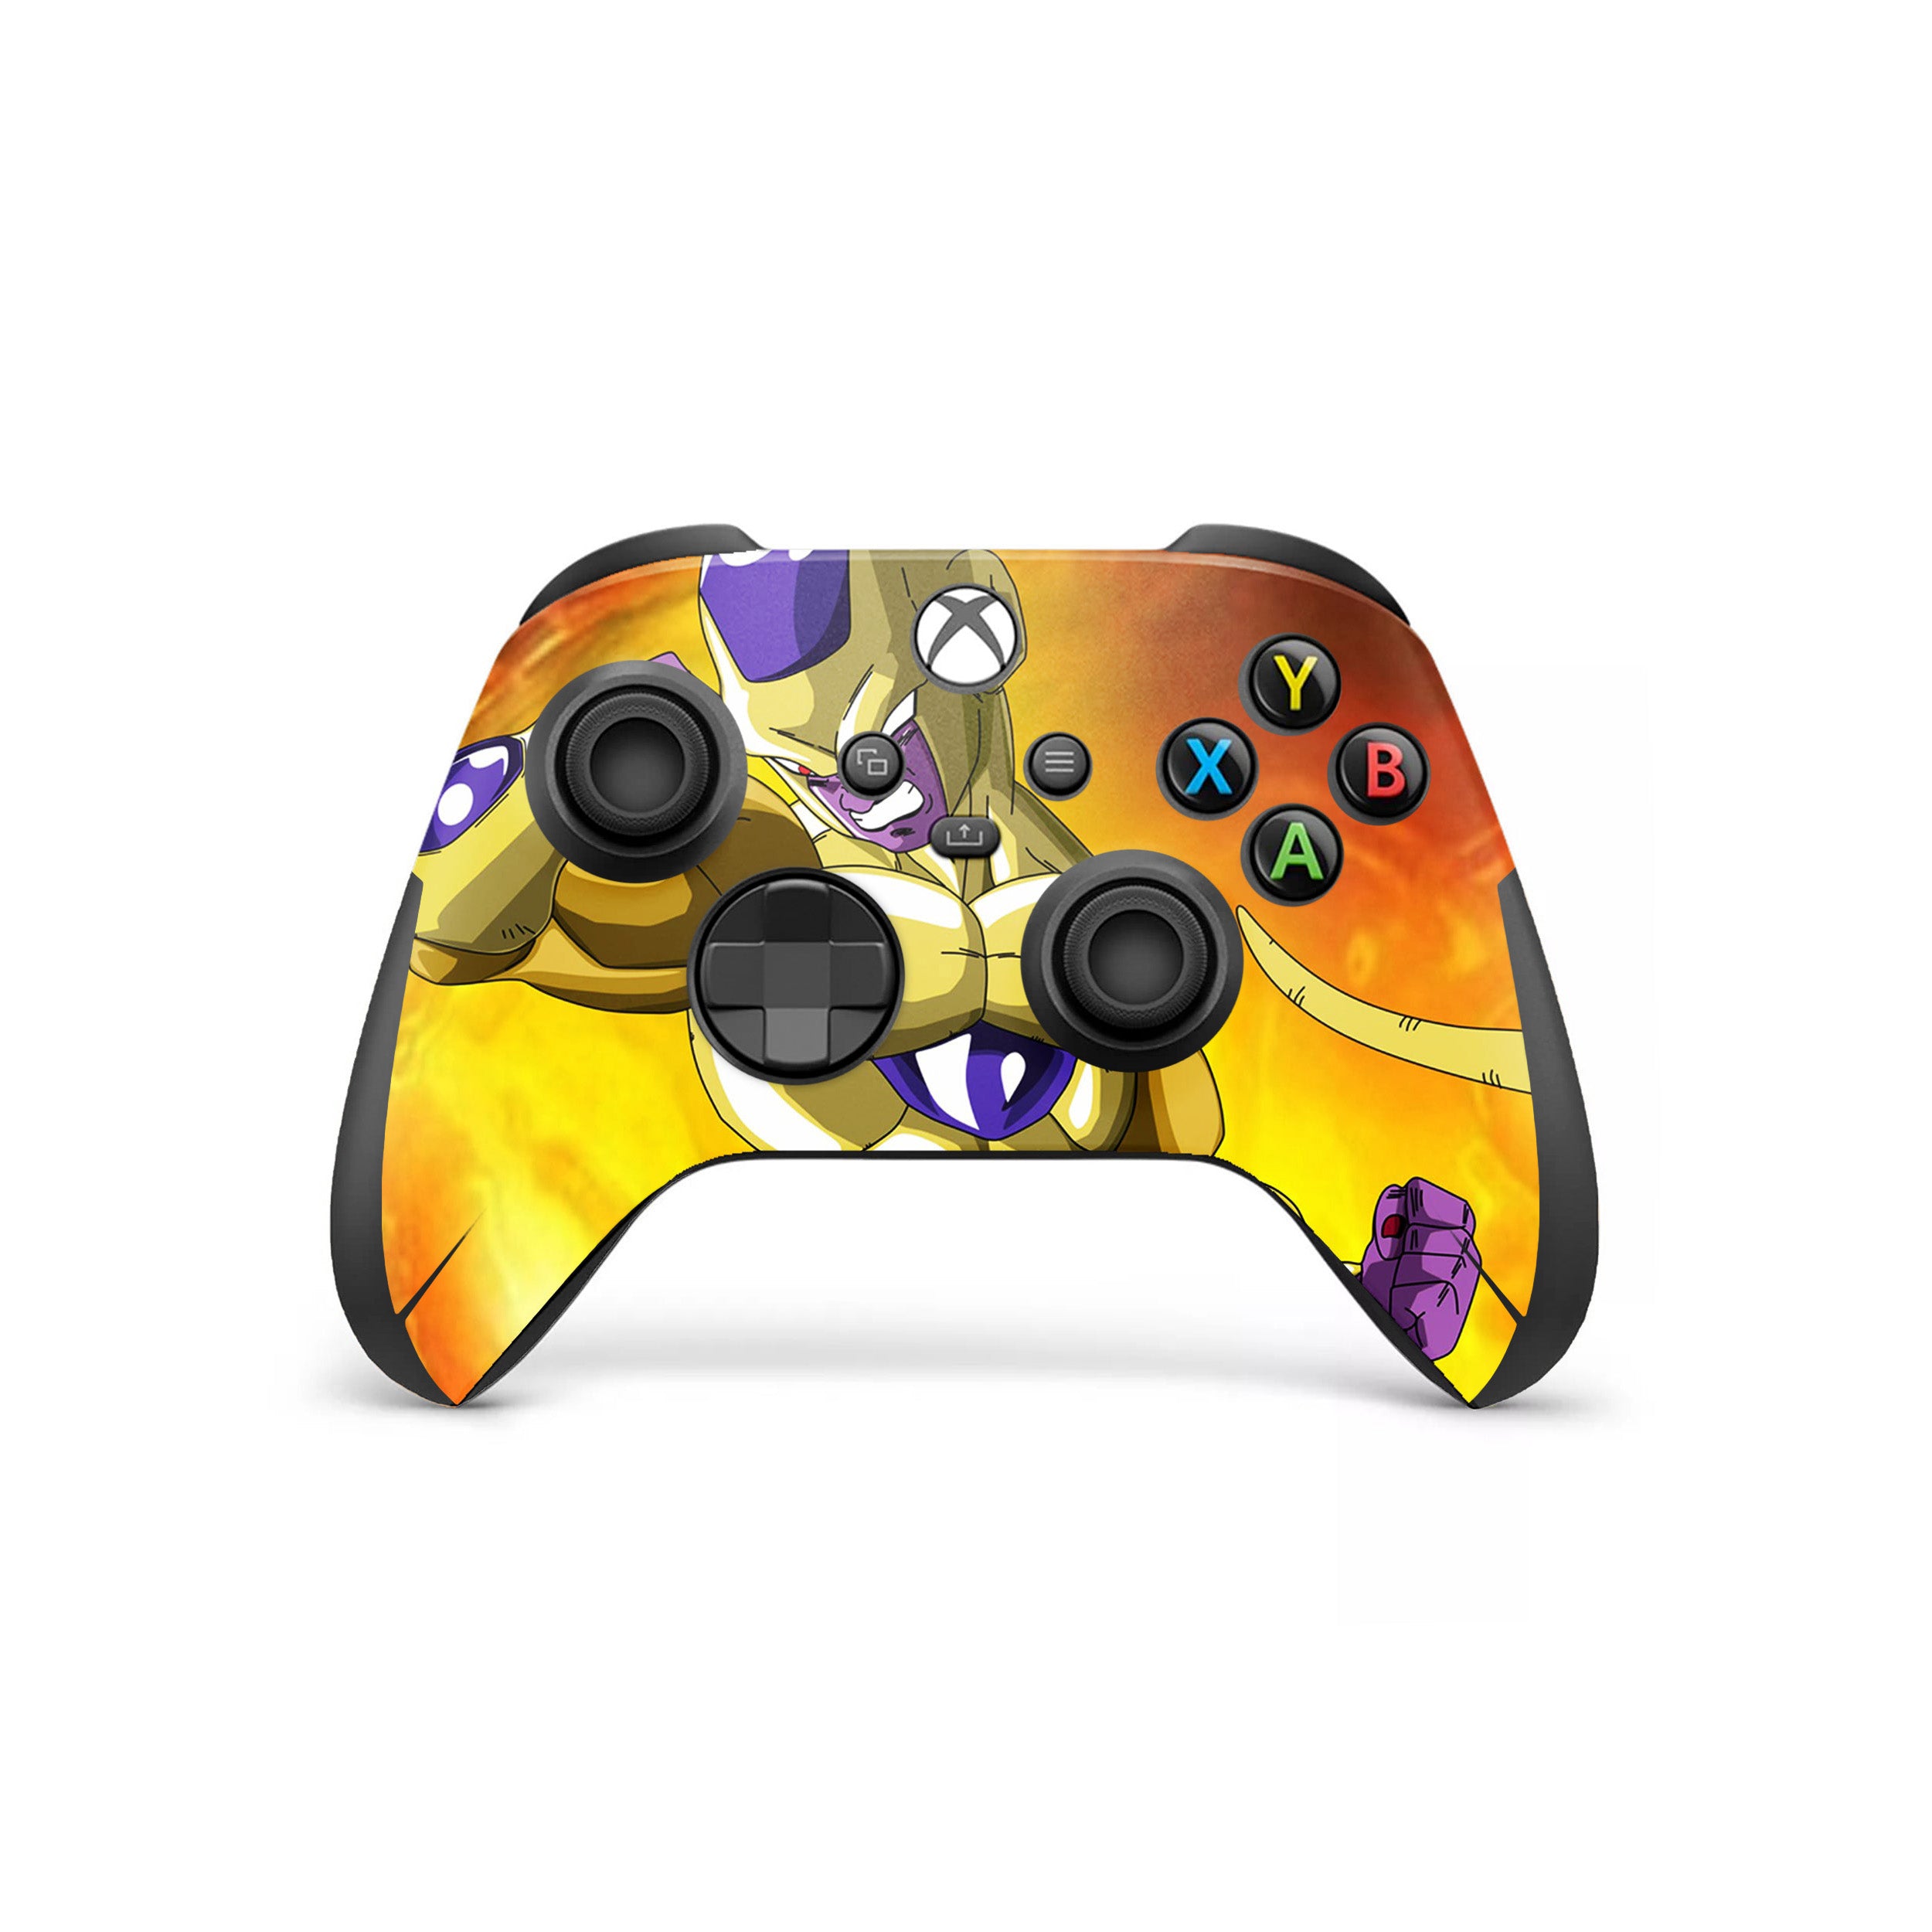 A video game skin featuring a Dragon Ball Super Frieza design for the Xbox Wireless Controller.